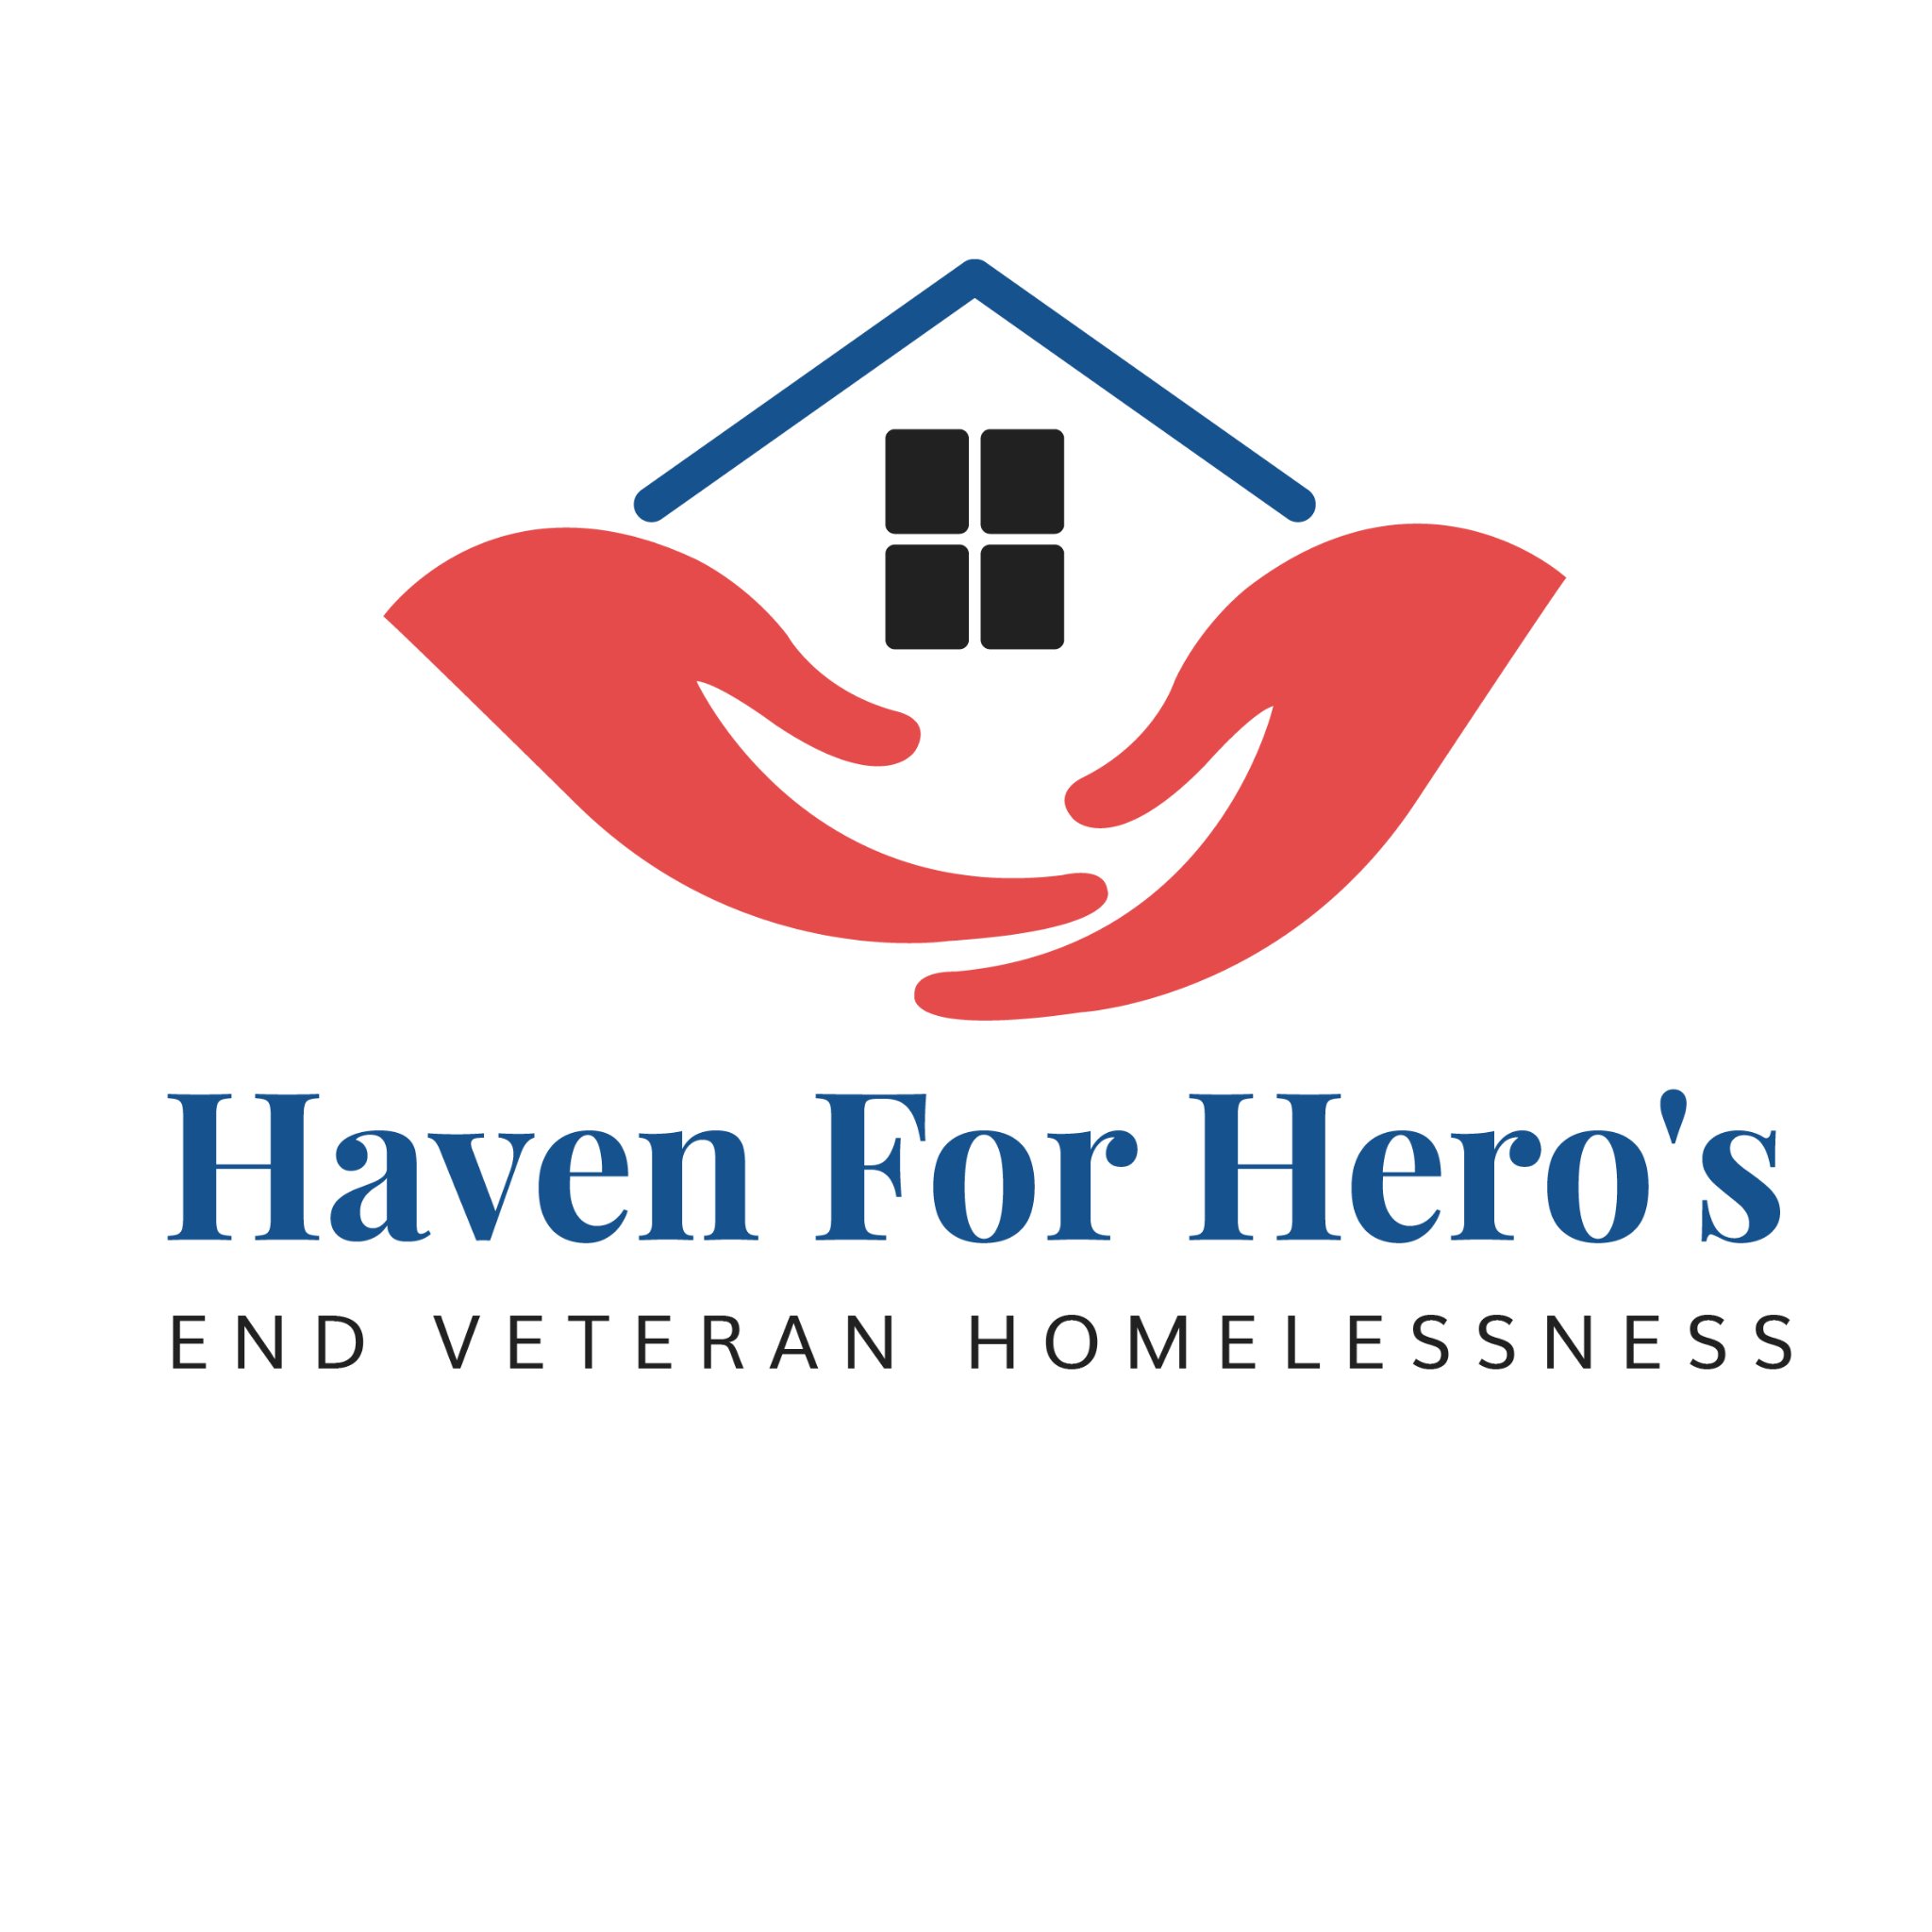 We help to provide veterans and their families with affordable housing to overcome homelessness and overwhelming challenges and achieve a high quality of life.